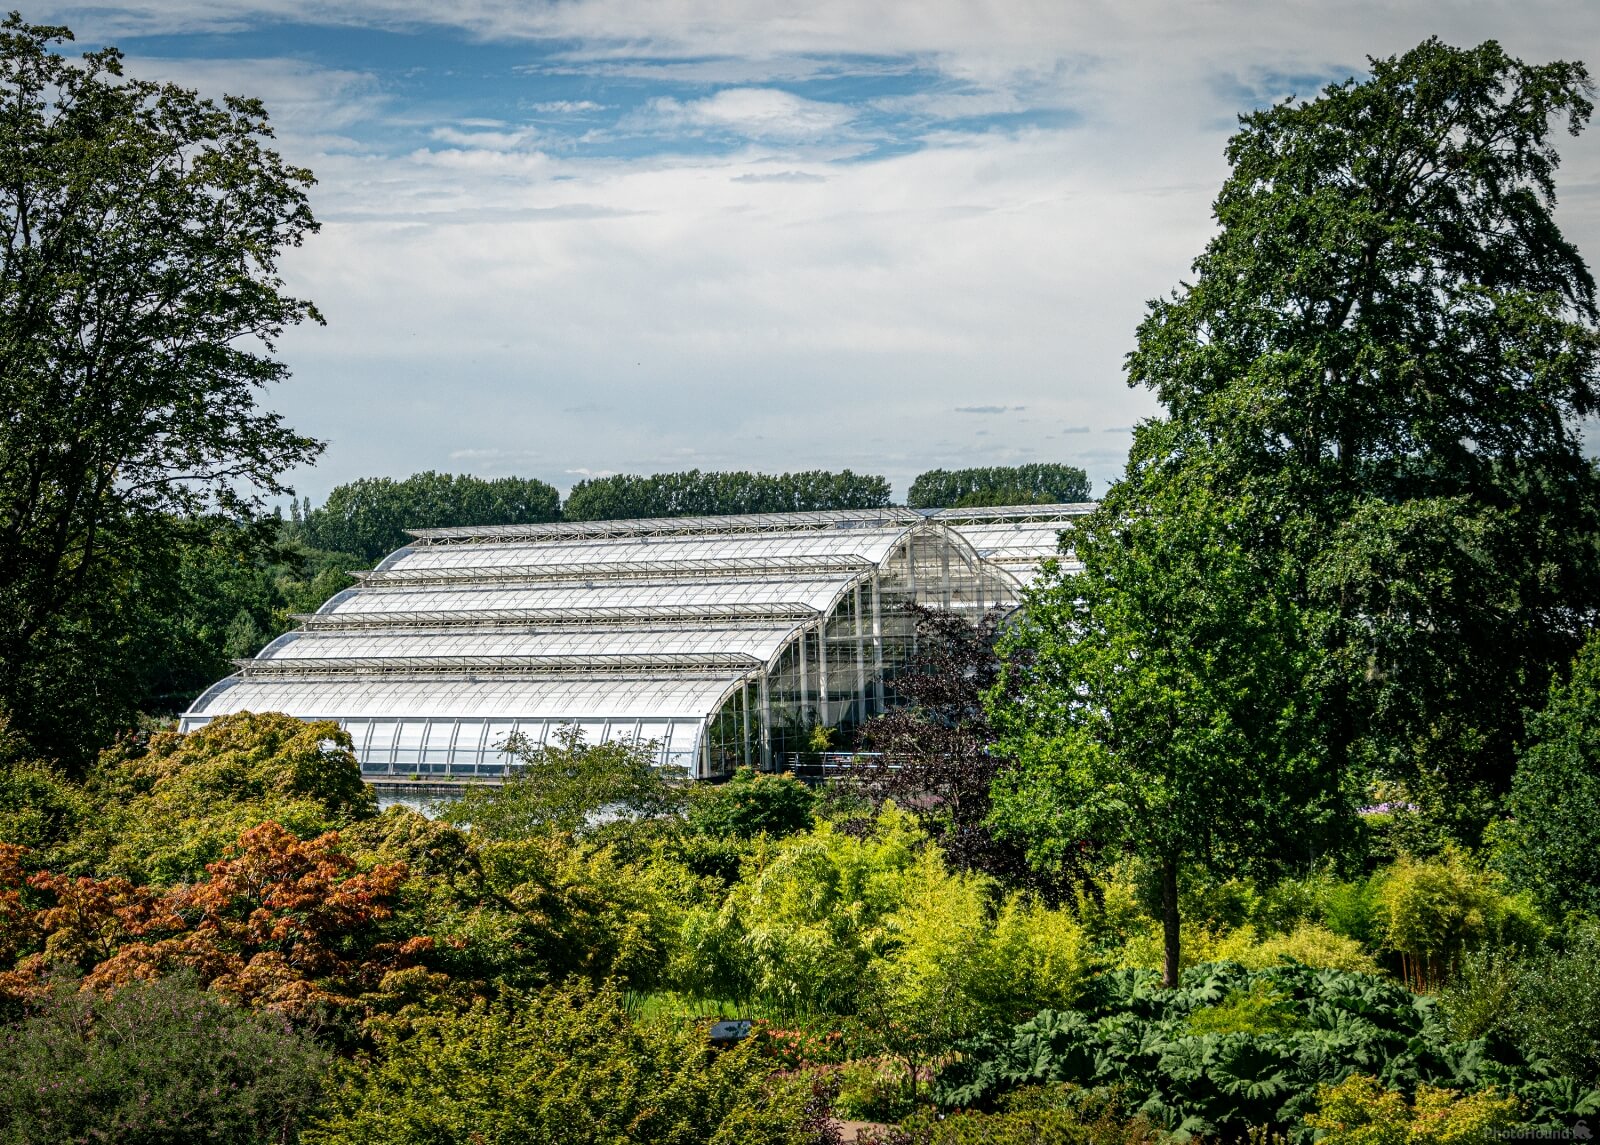 Image of RHS Garden Wisley by Richard Lizzimore